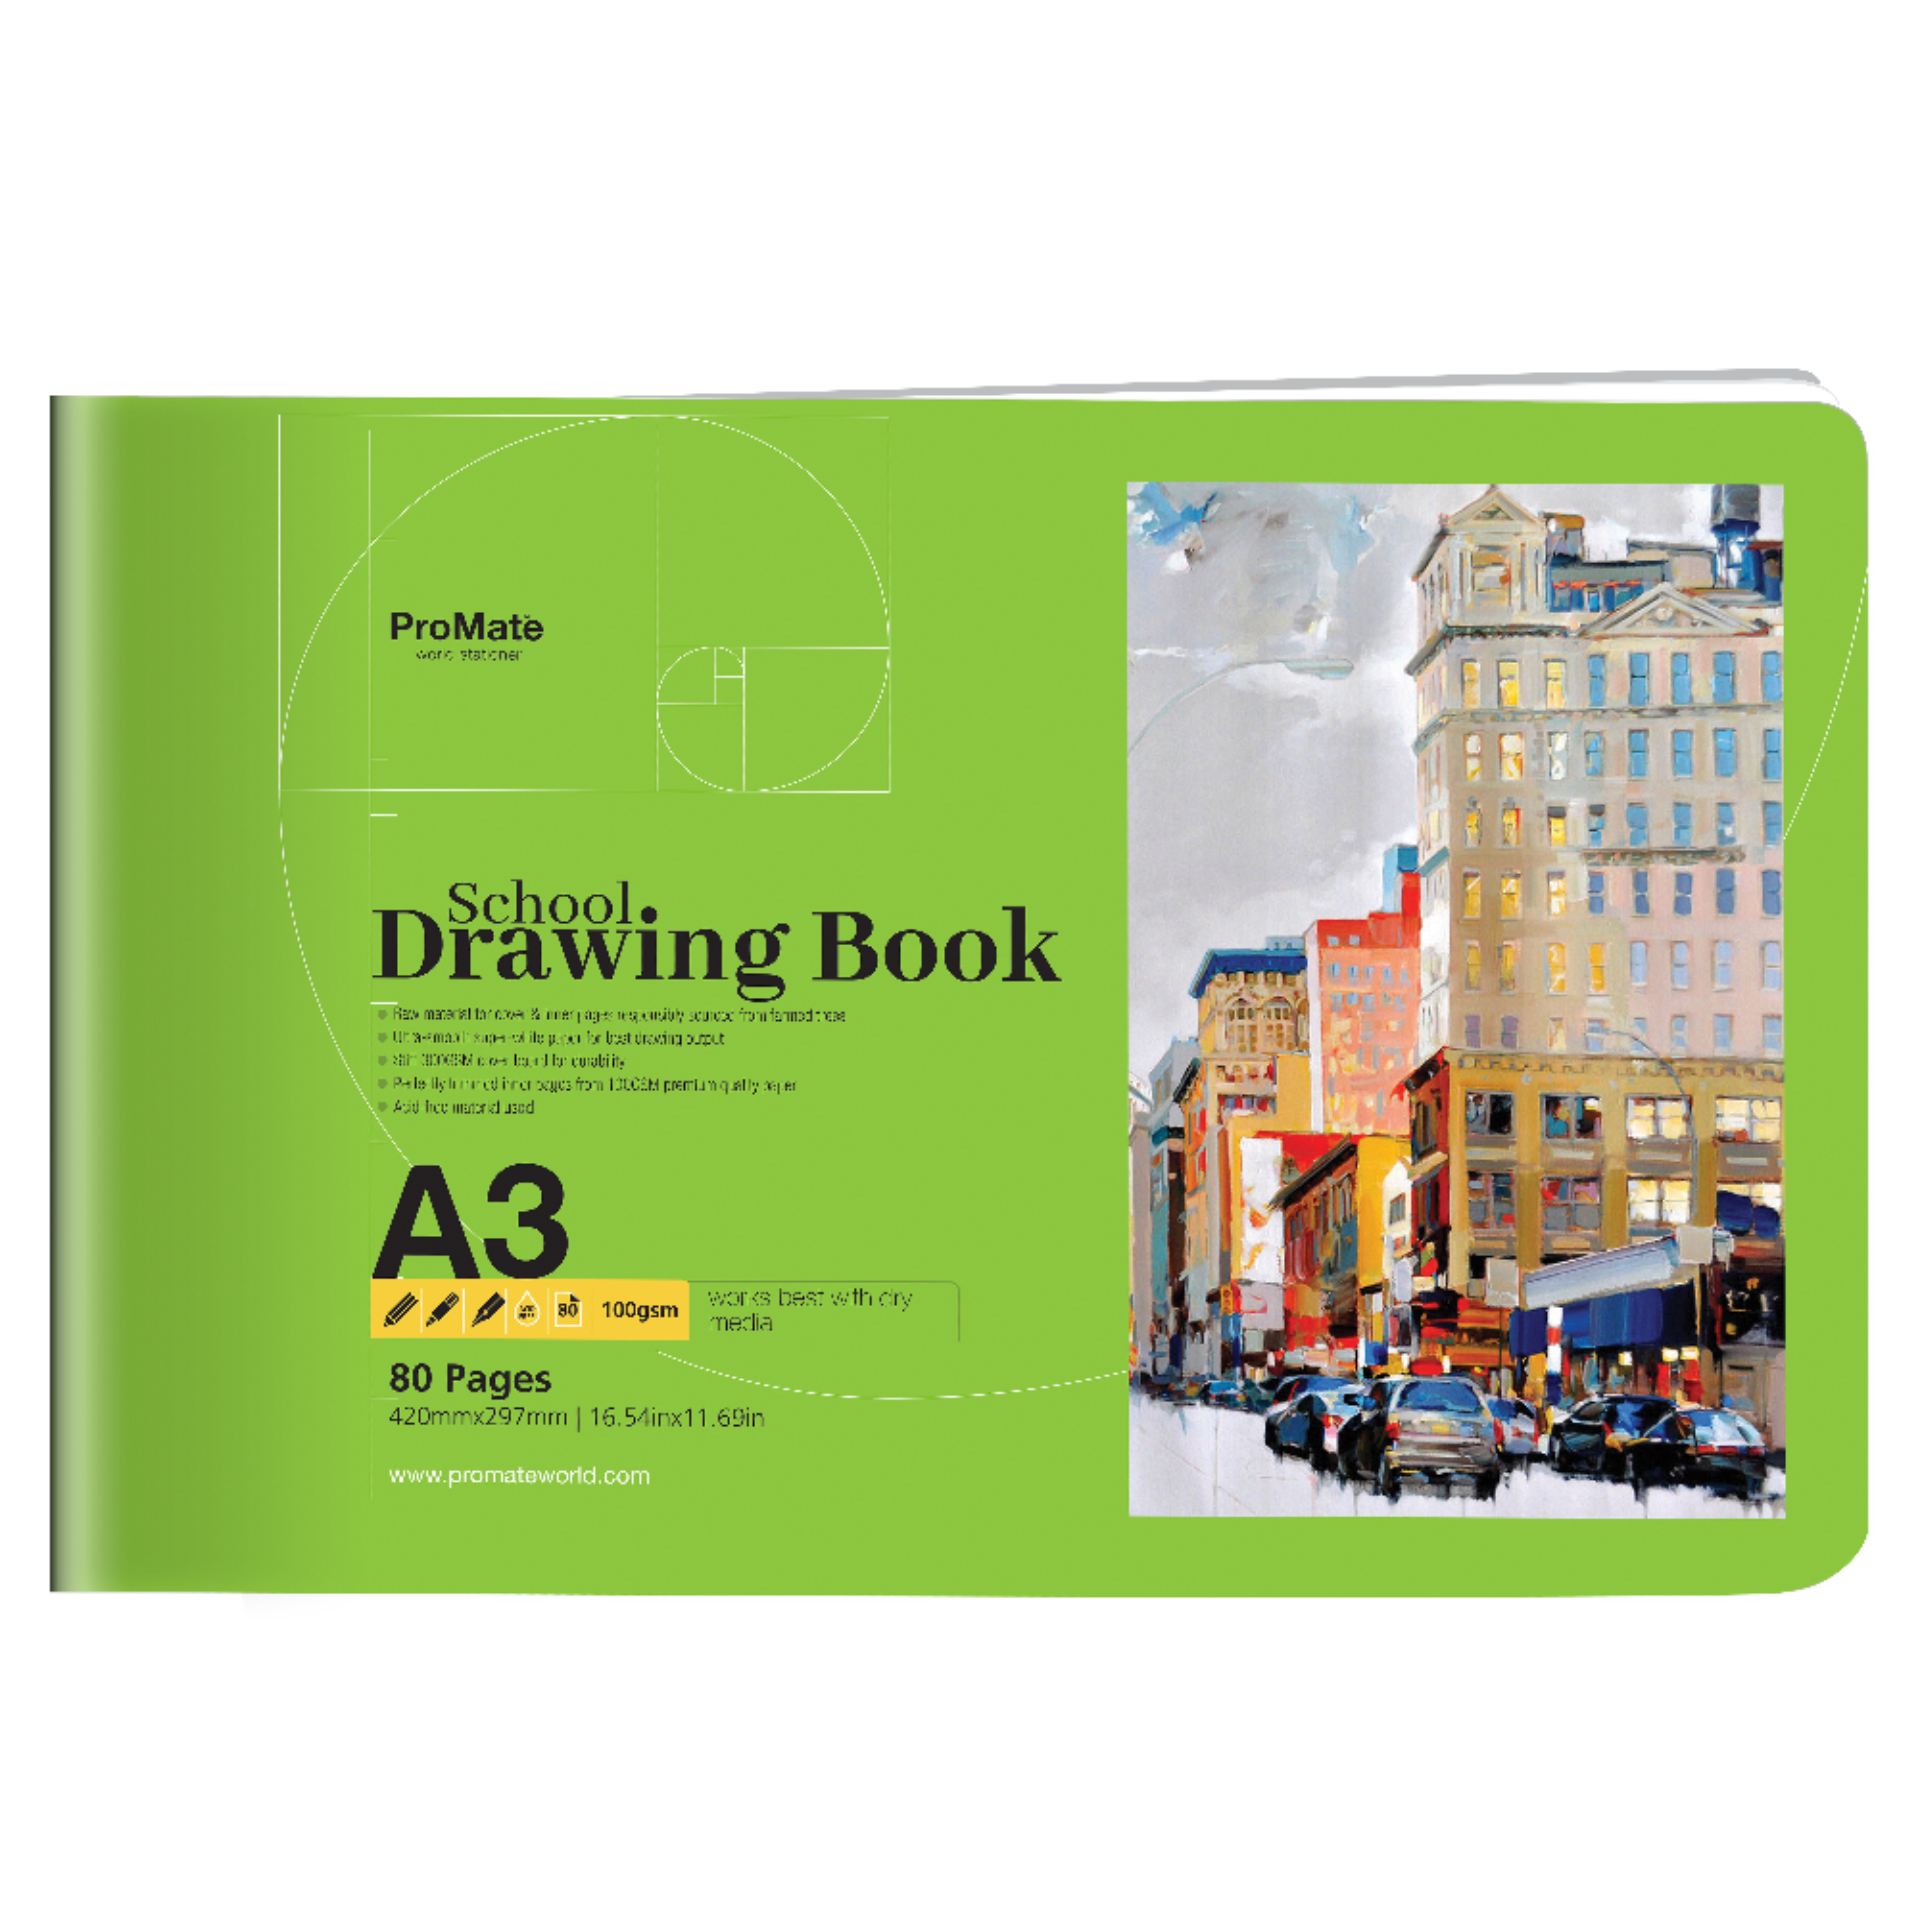 Promate School Drawing Book A3 80 Pages 